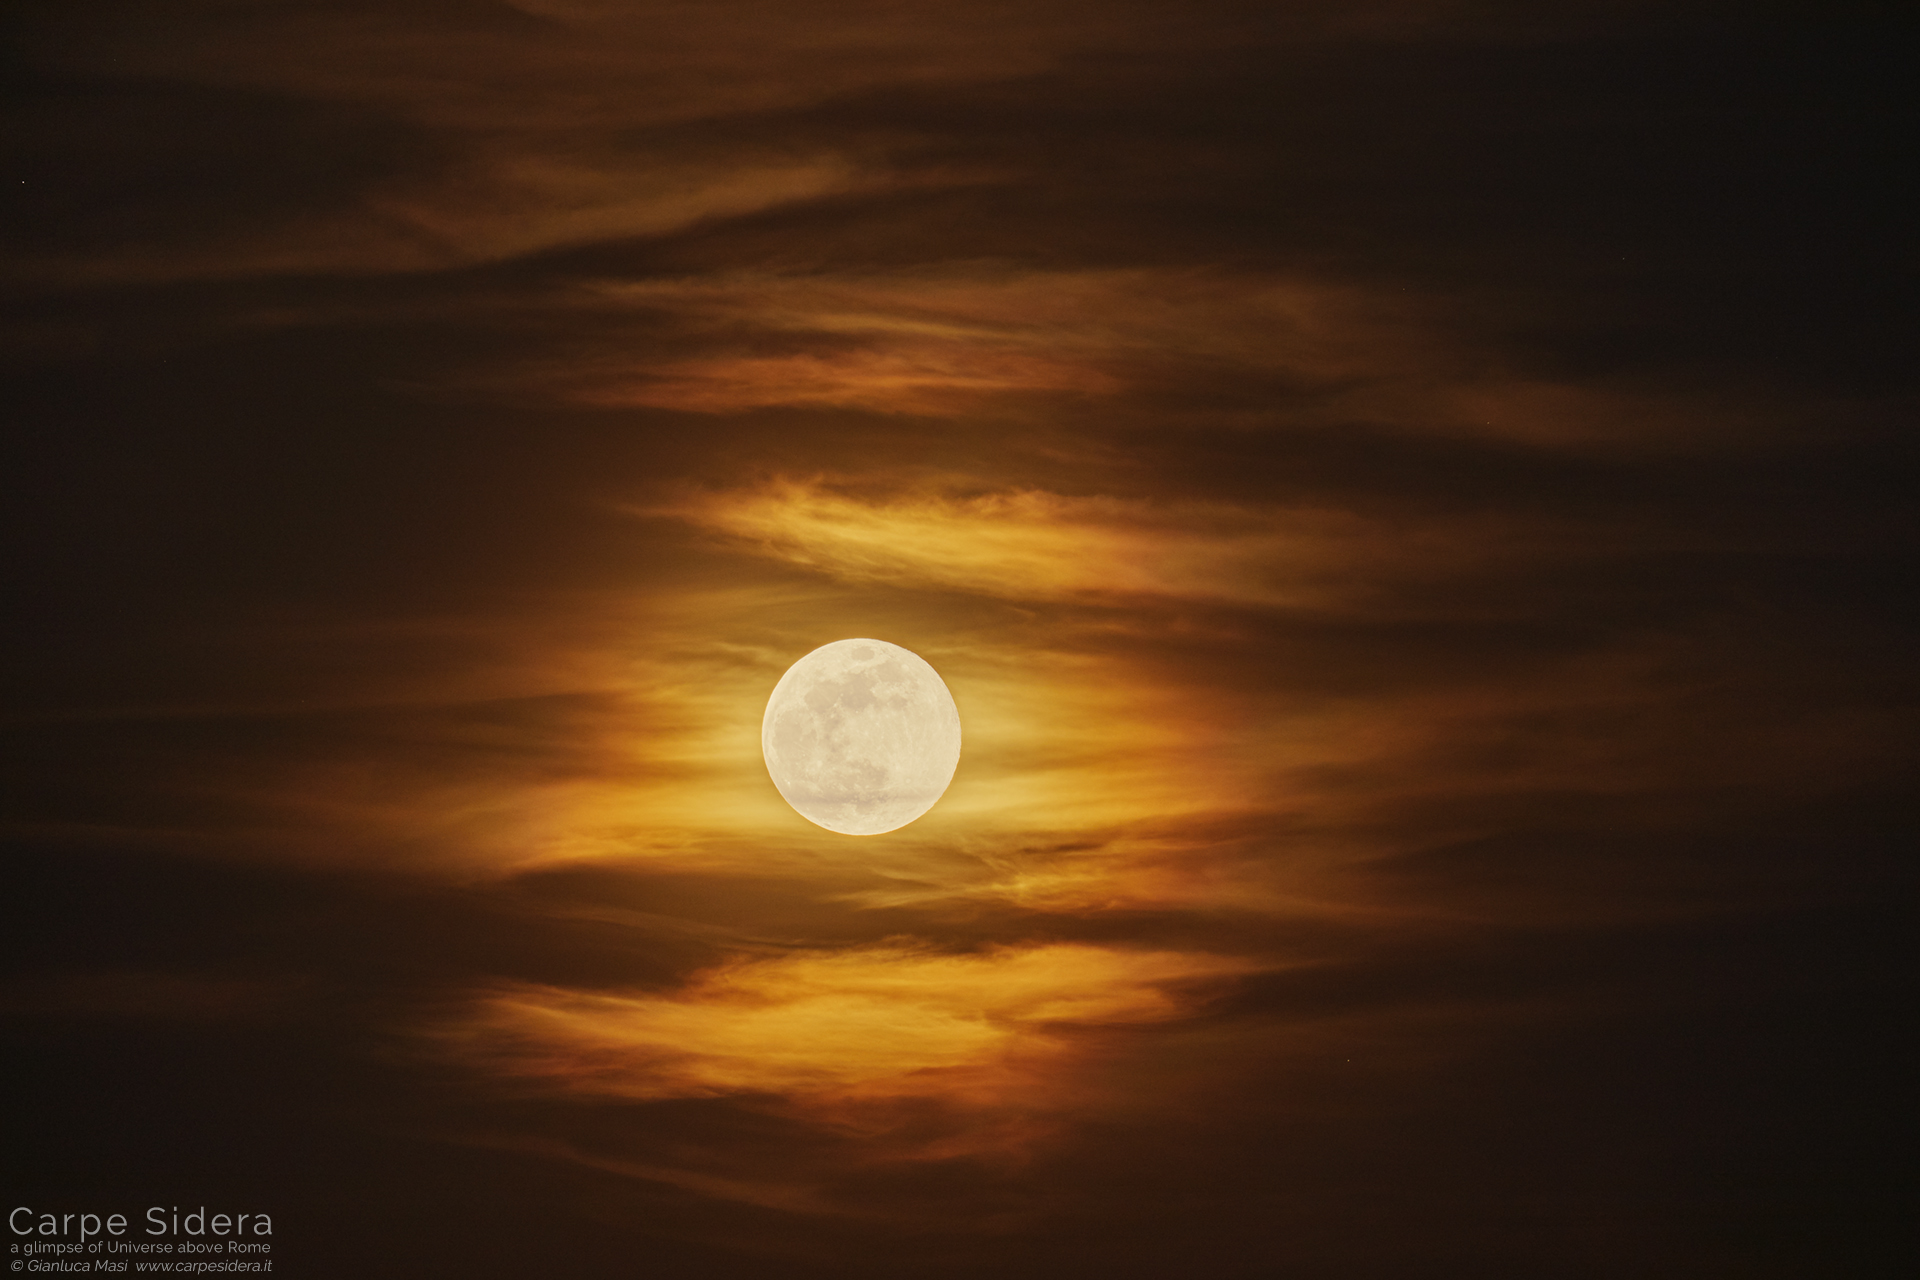 The 19 Apr. 2019 full Moon shines across the clouds.